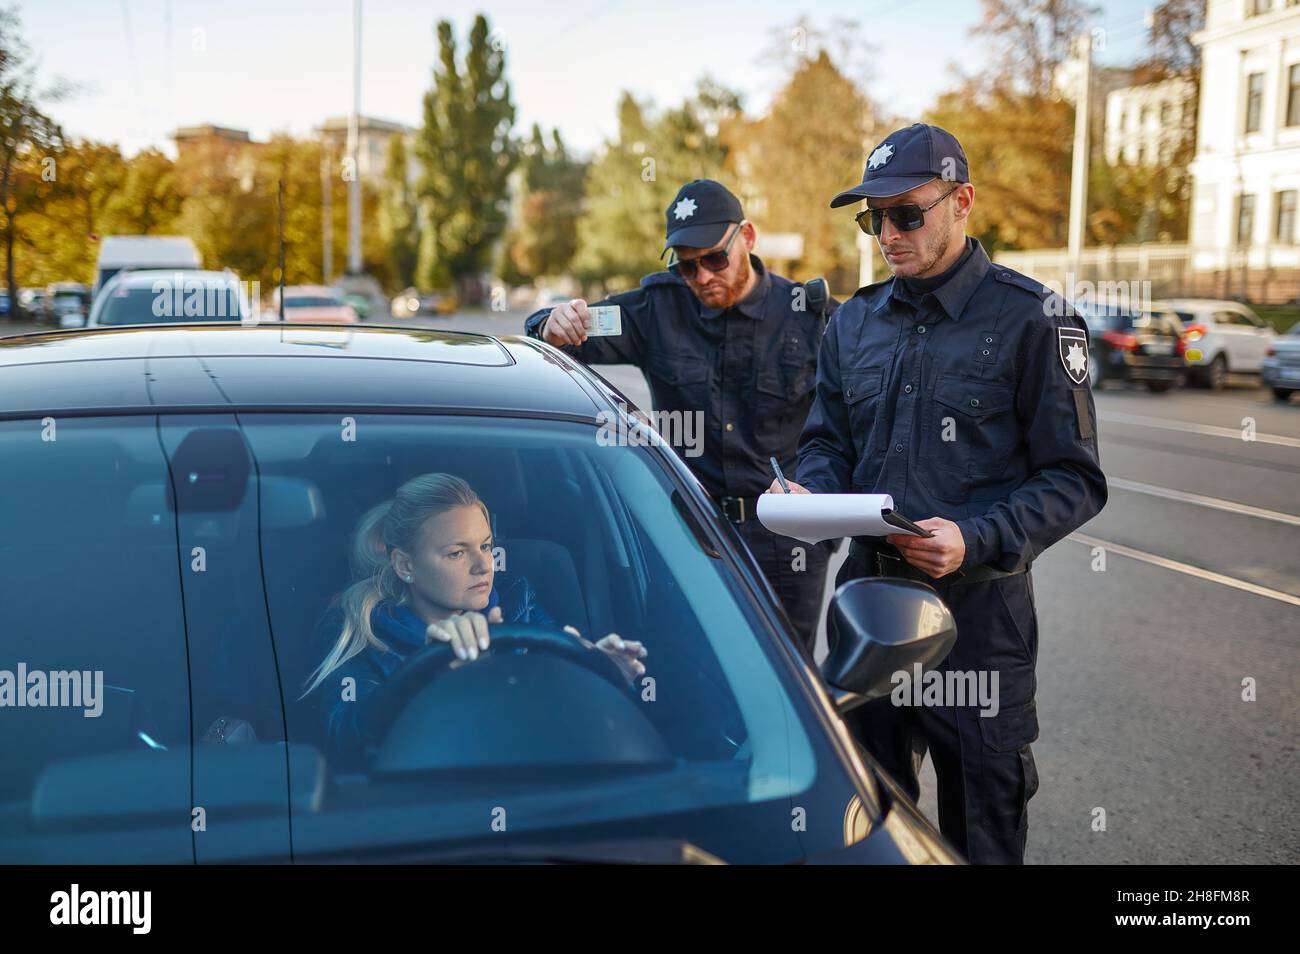 Police patrol checking driver's license of driver Stock Photo